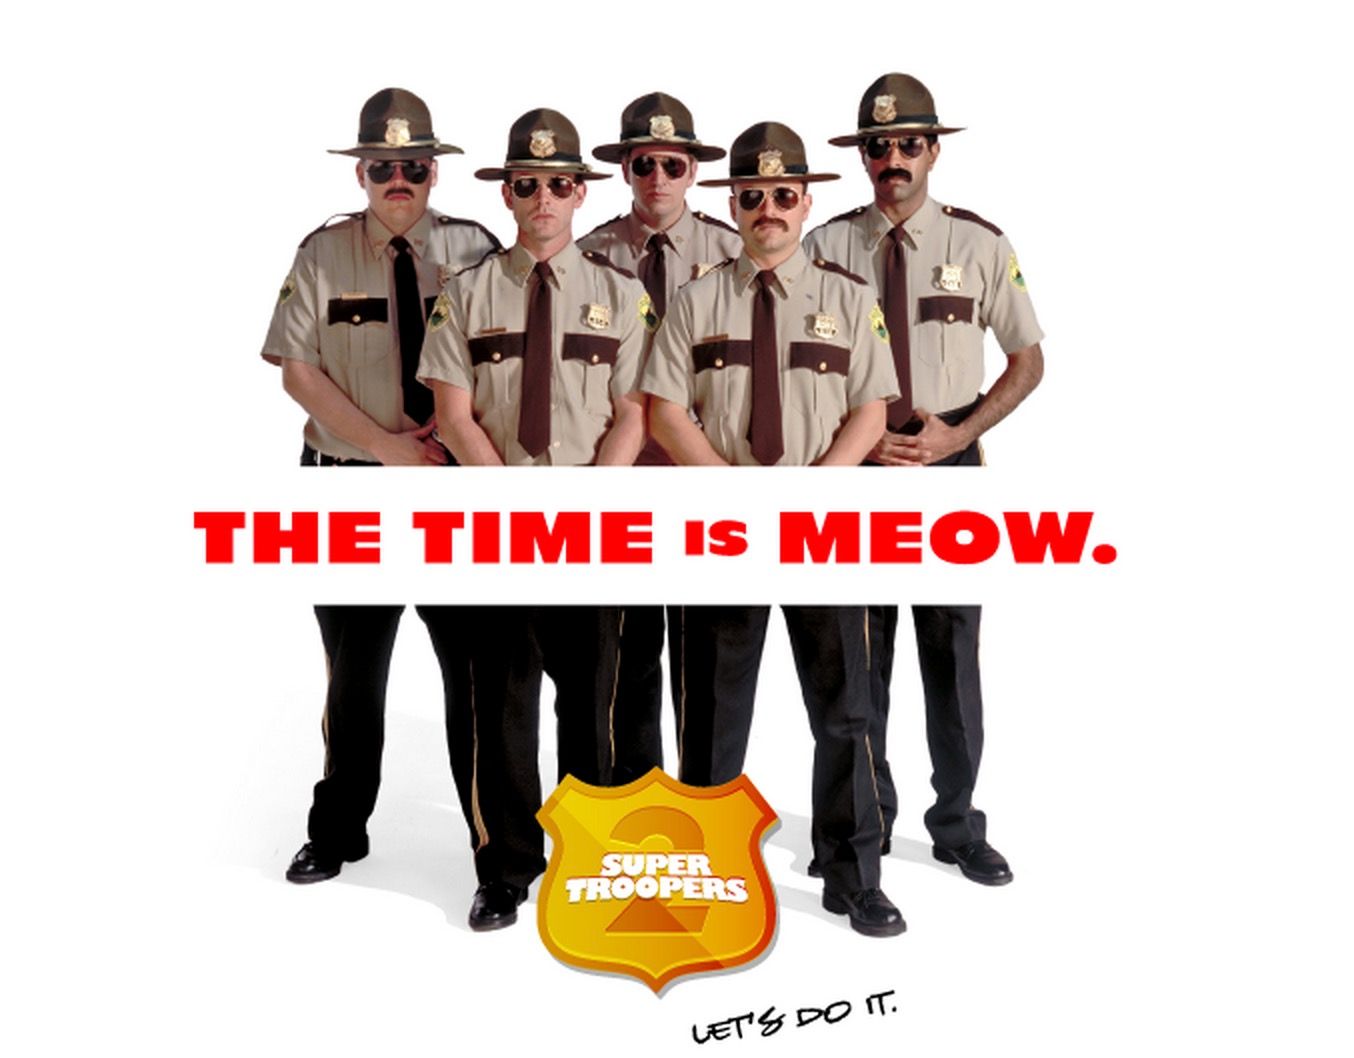 super troopers 2 is finally happening as long as it raises 2m on indiegogo image 1